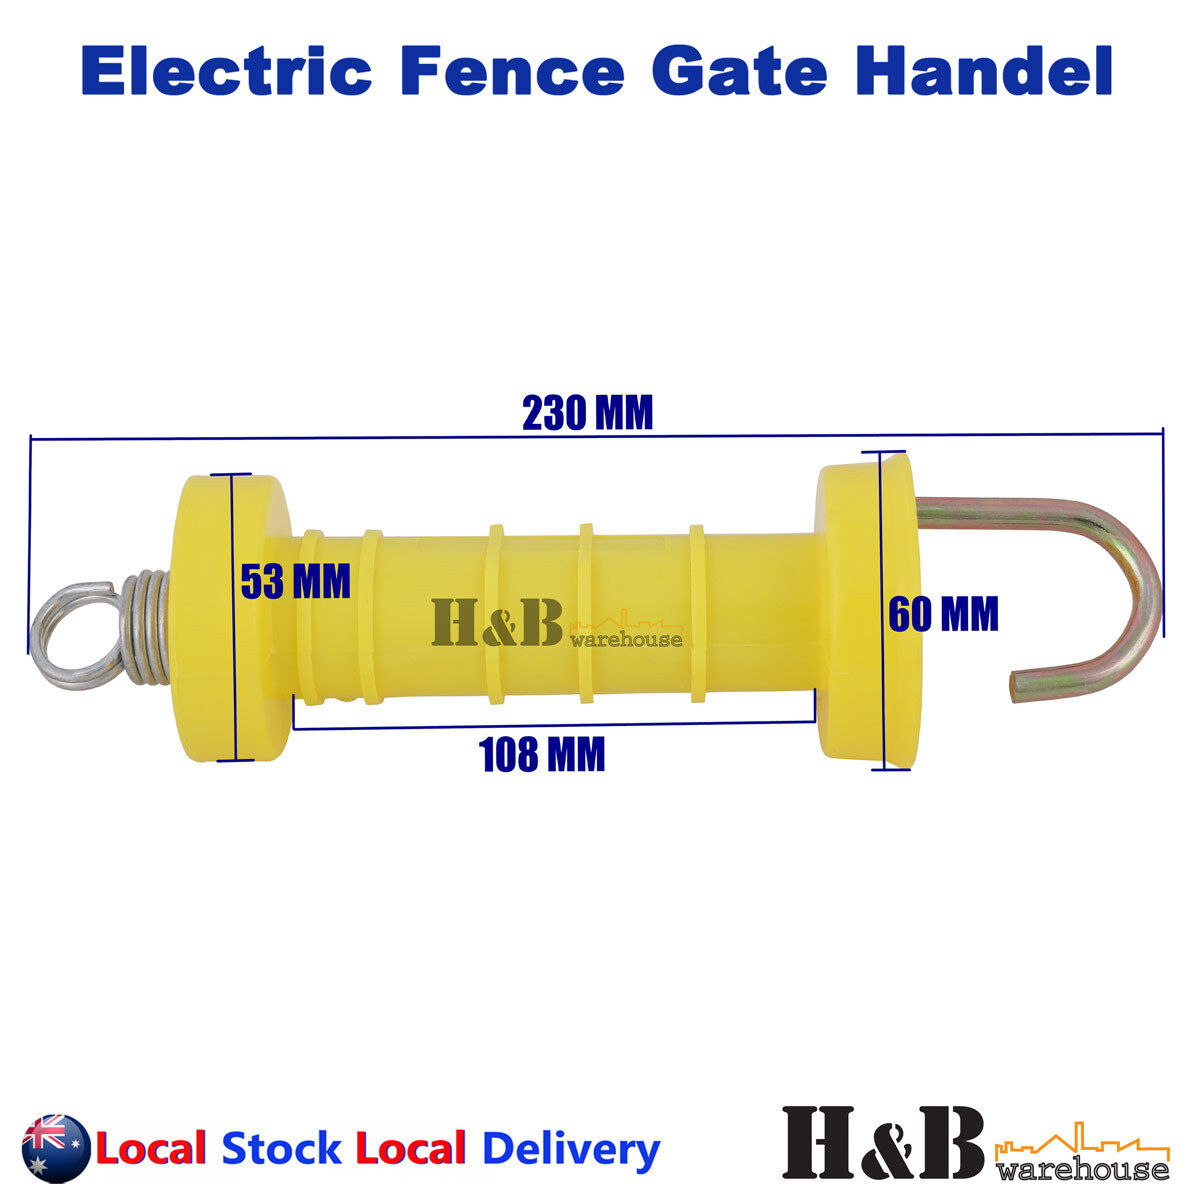 20 Pcs Electric Fence Gate Handle Insulated Spring Handles Yellow